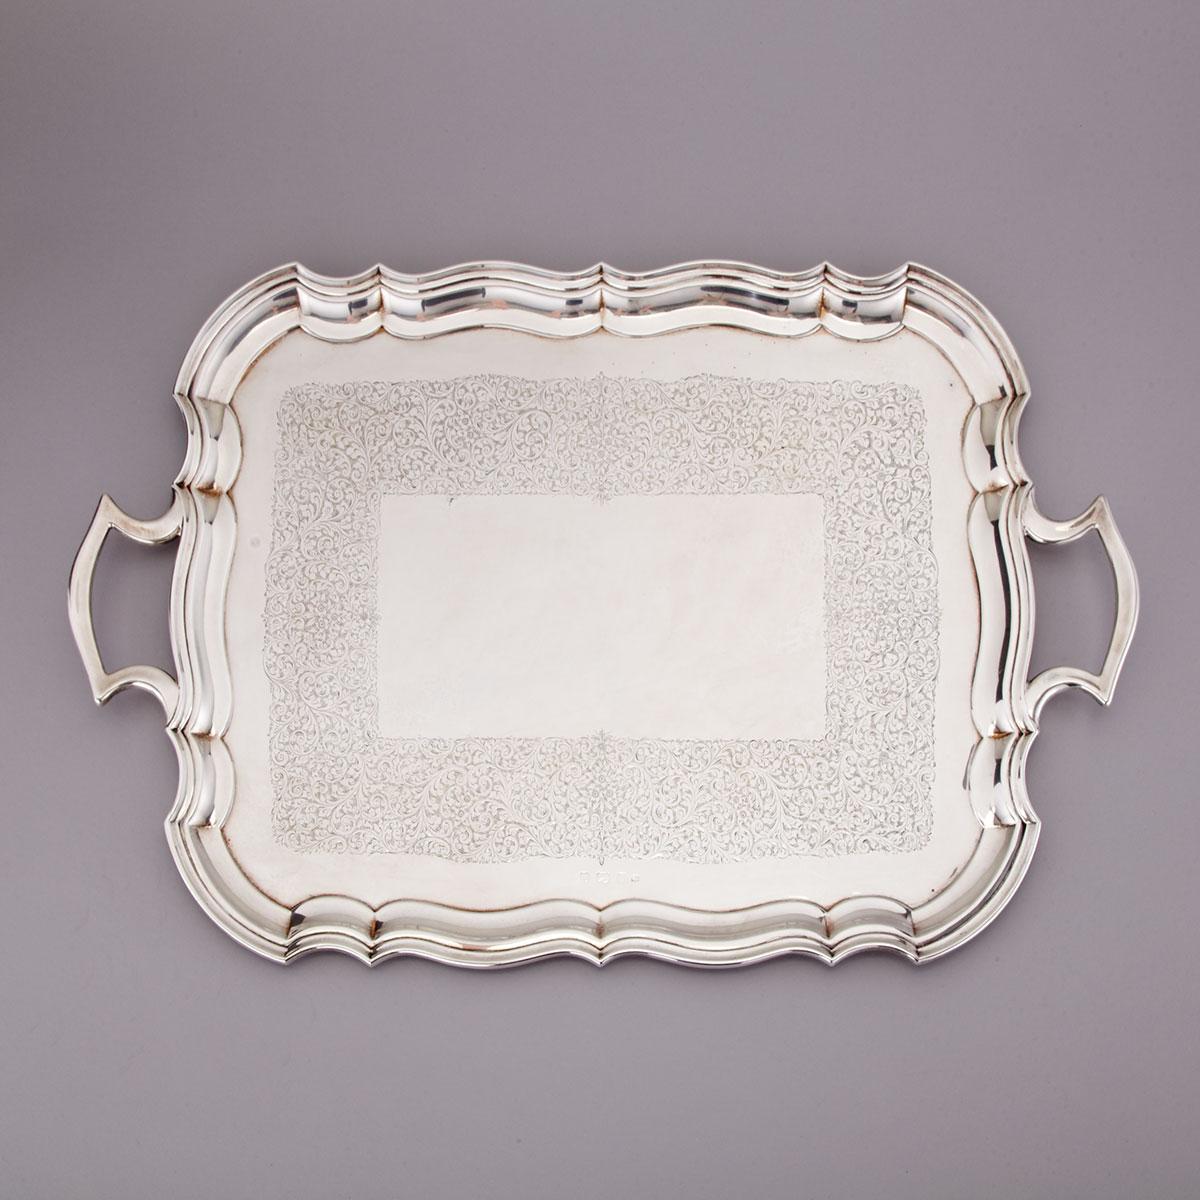 English Silver Two-Handled Rectangular Serving Tray, Charles S. Green & Co., Birmingham, 1937